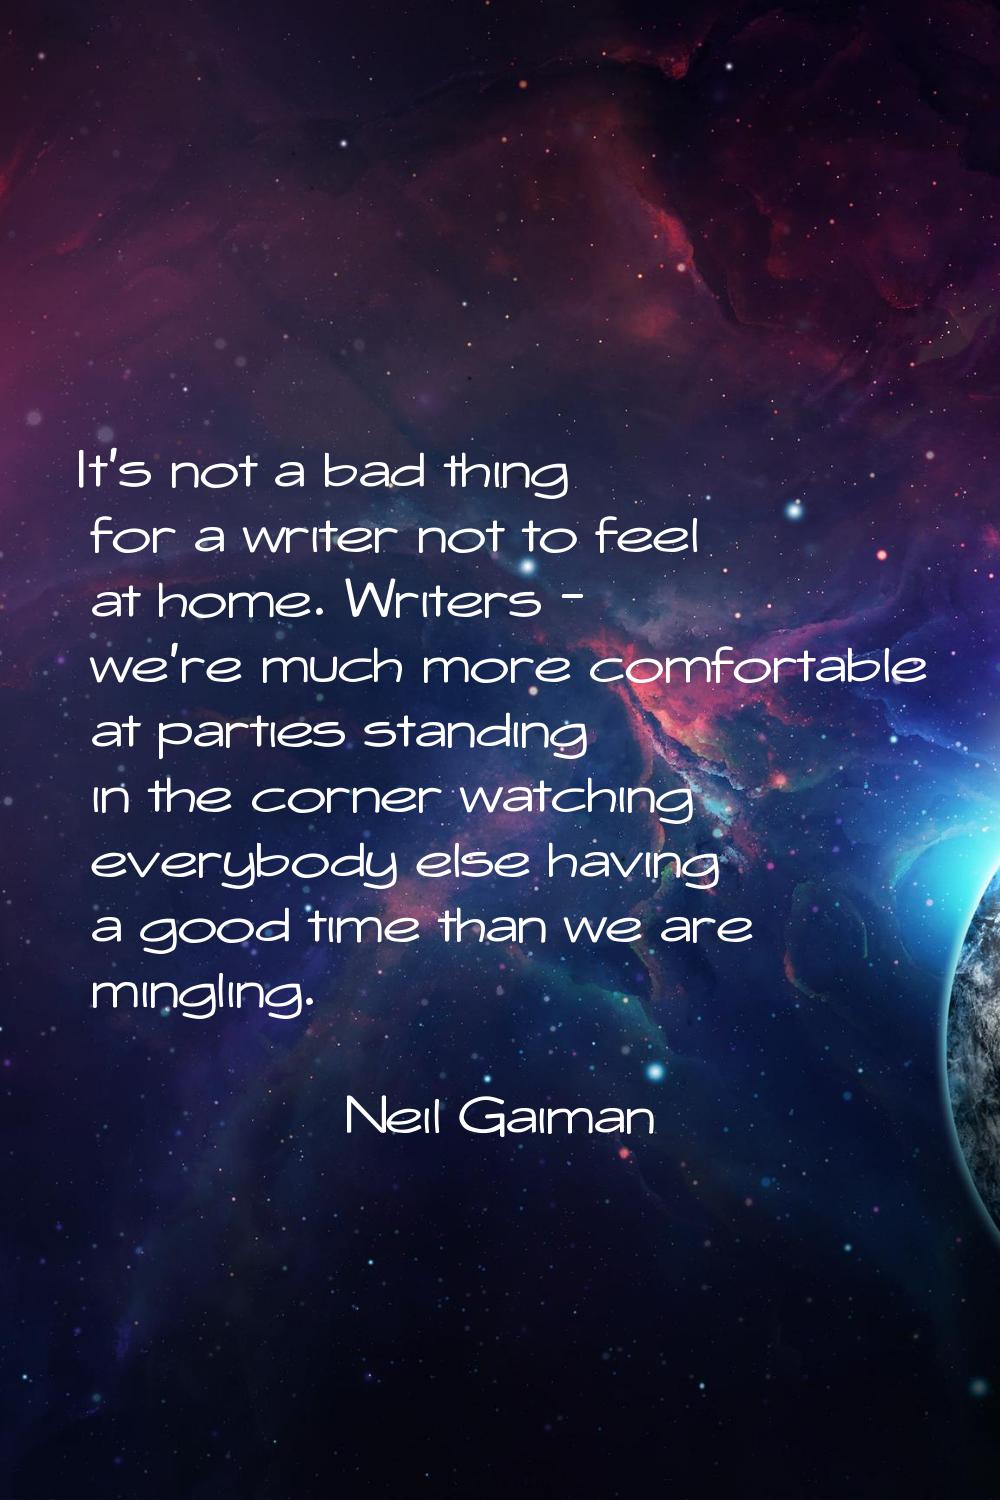 It's not a bad thing for a writer not to feel at home. Writers - we're much more comfortable at par